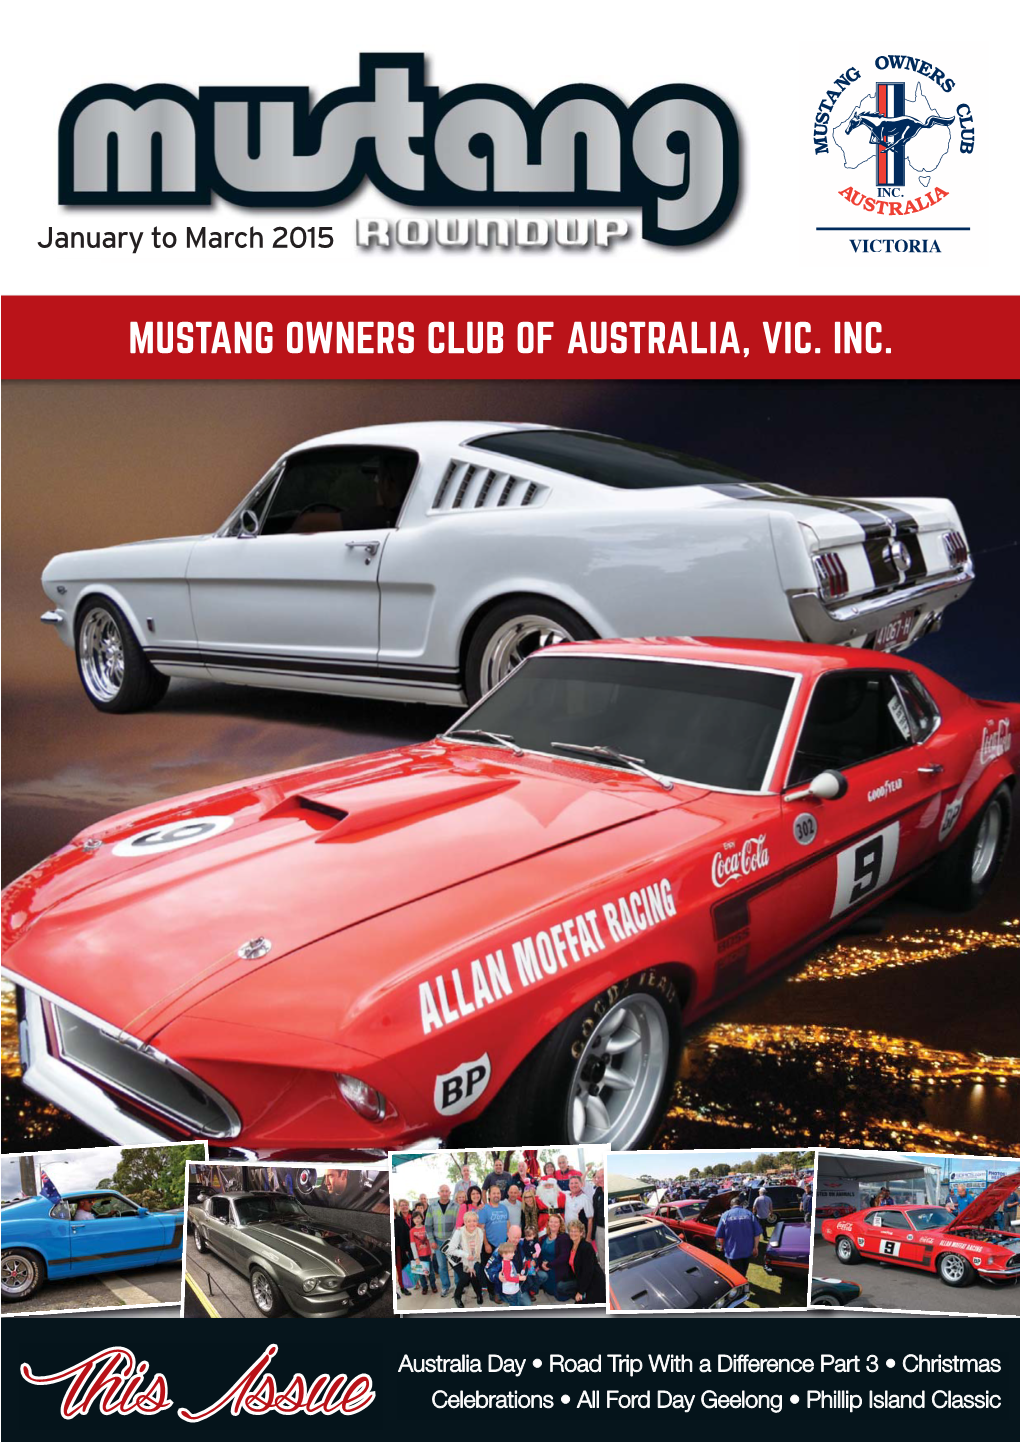 Mustang Owners Club of Australia, Vic. Inc